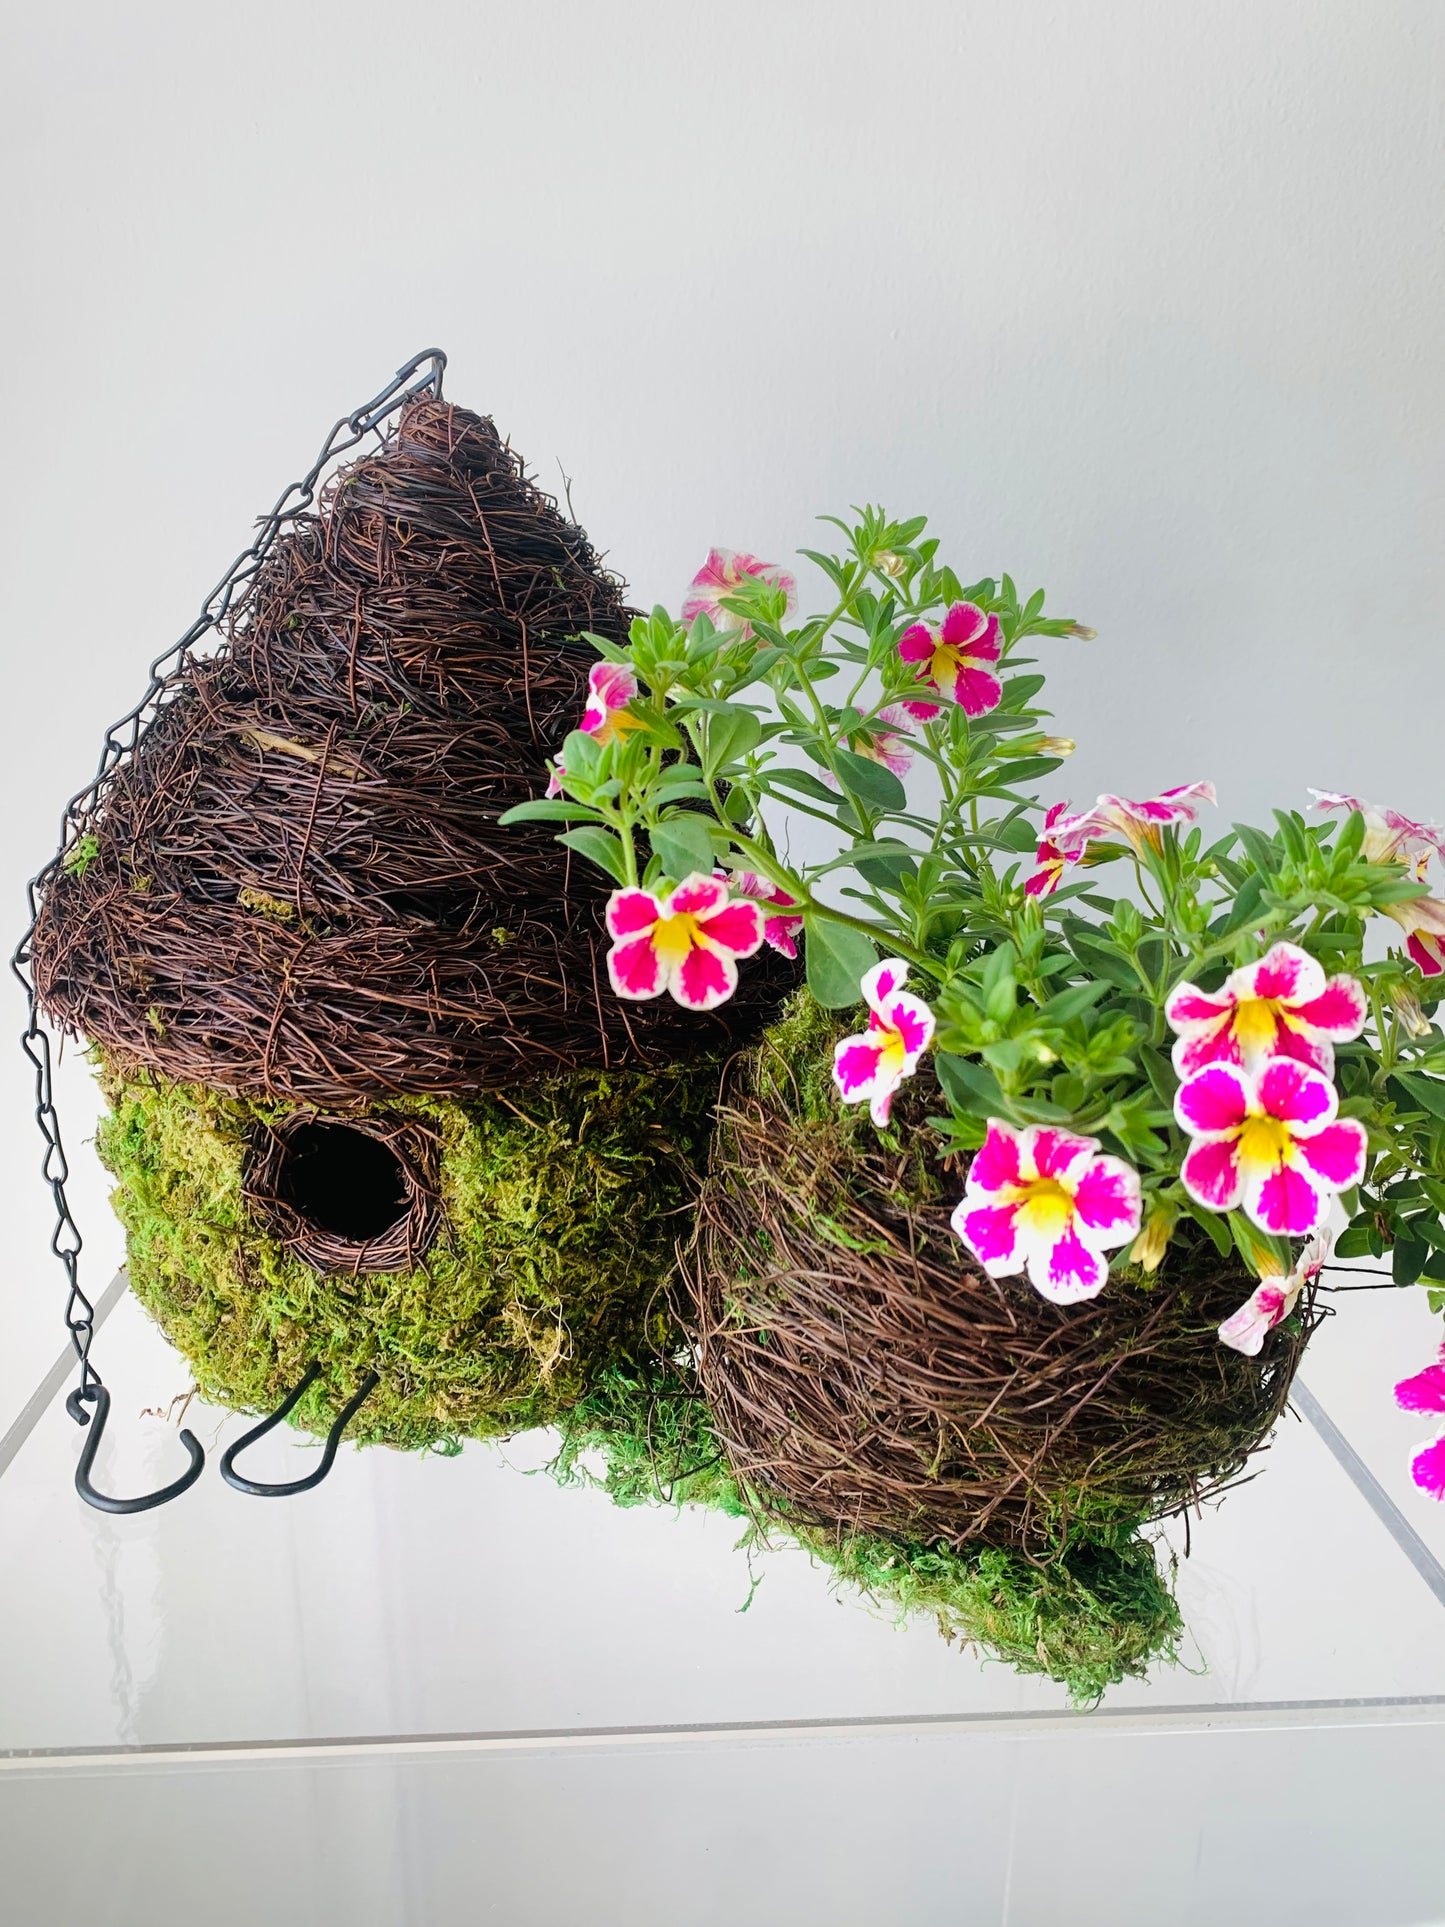 A unique flower arrangement with a moss bird house makes the perfect gift.